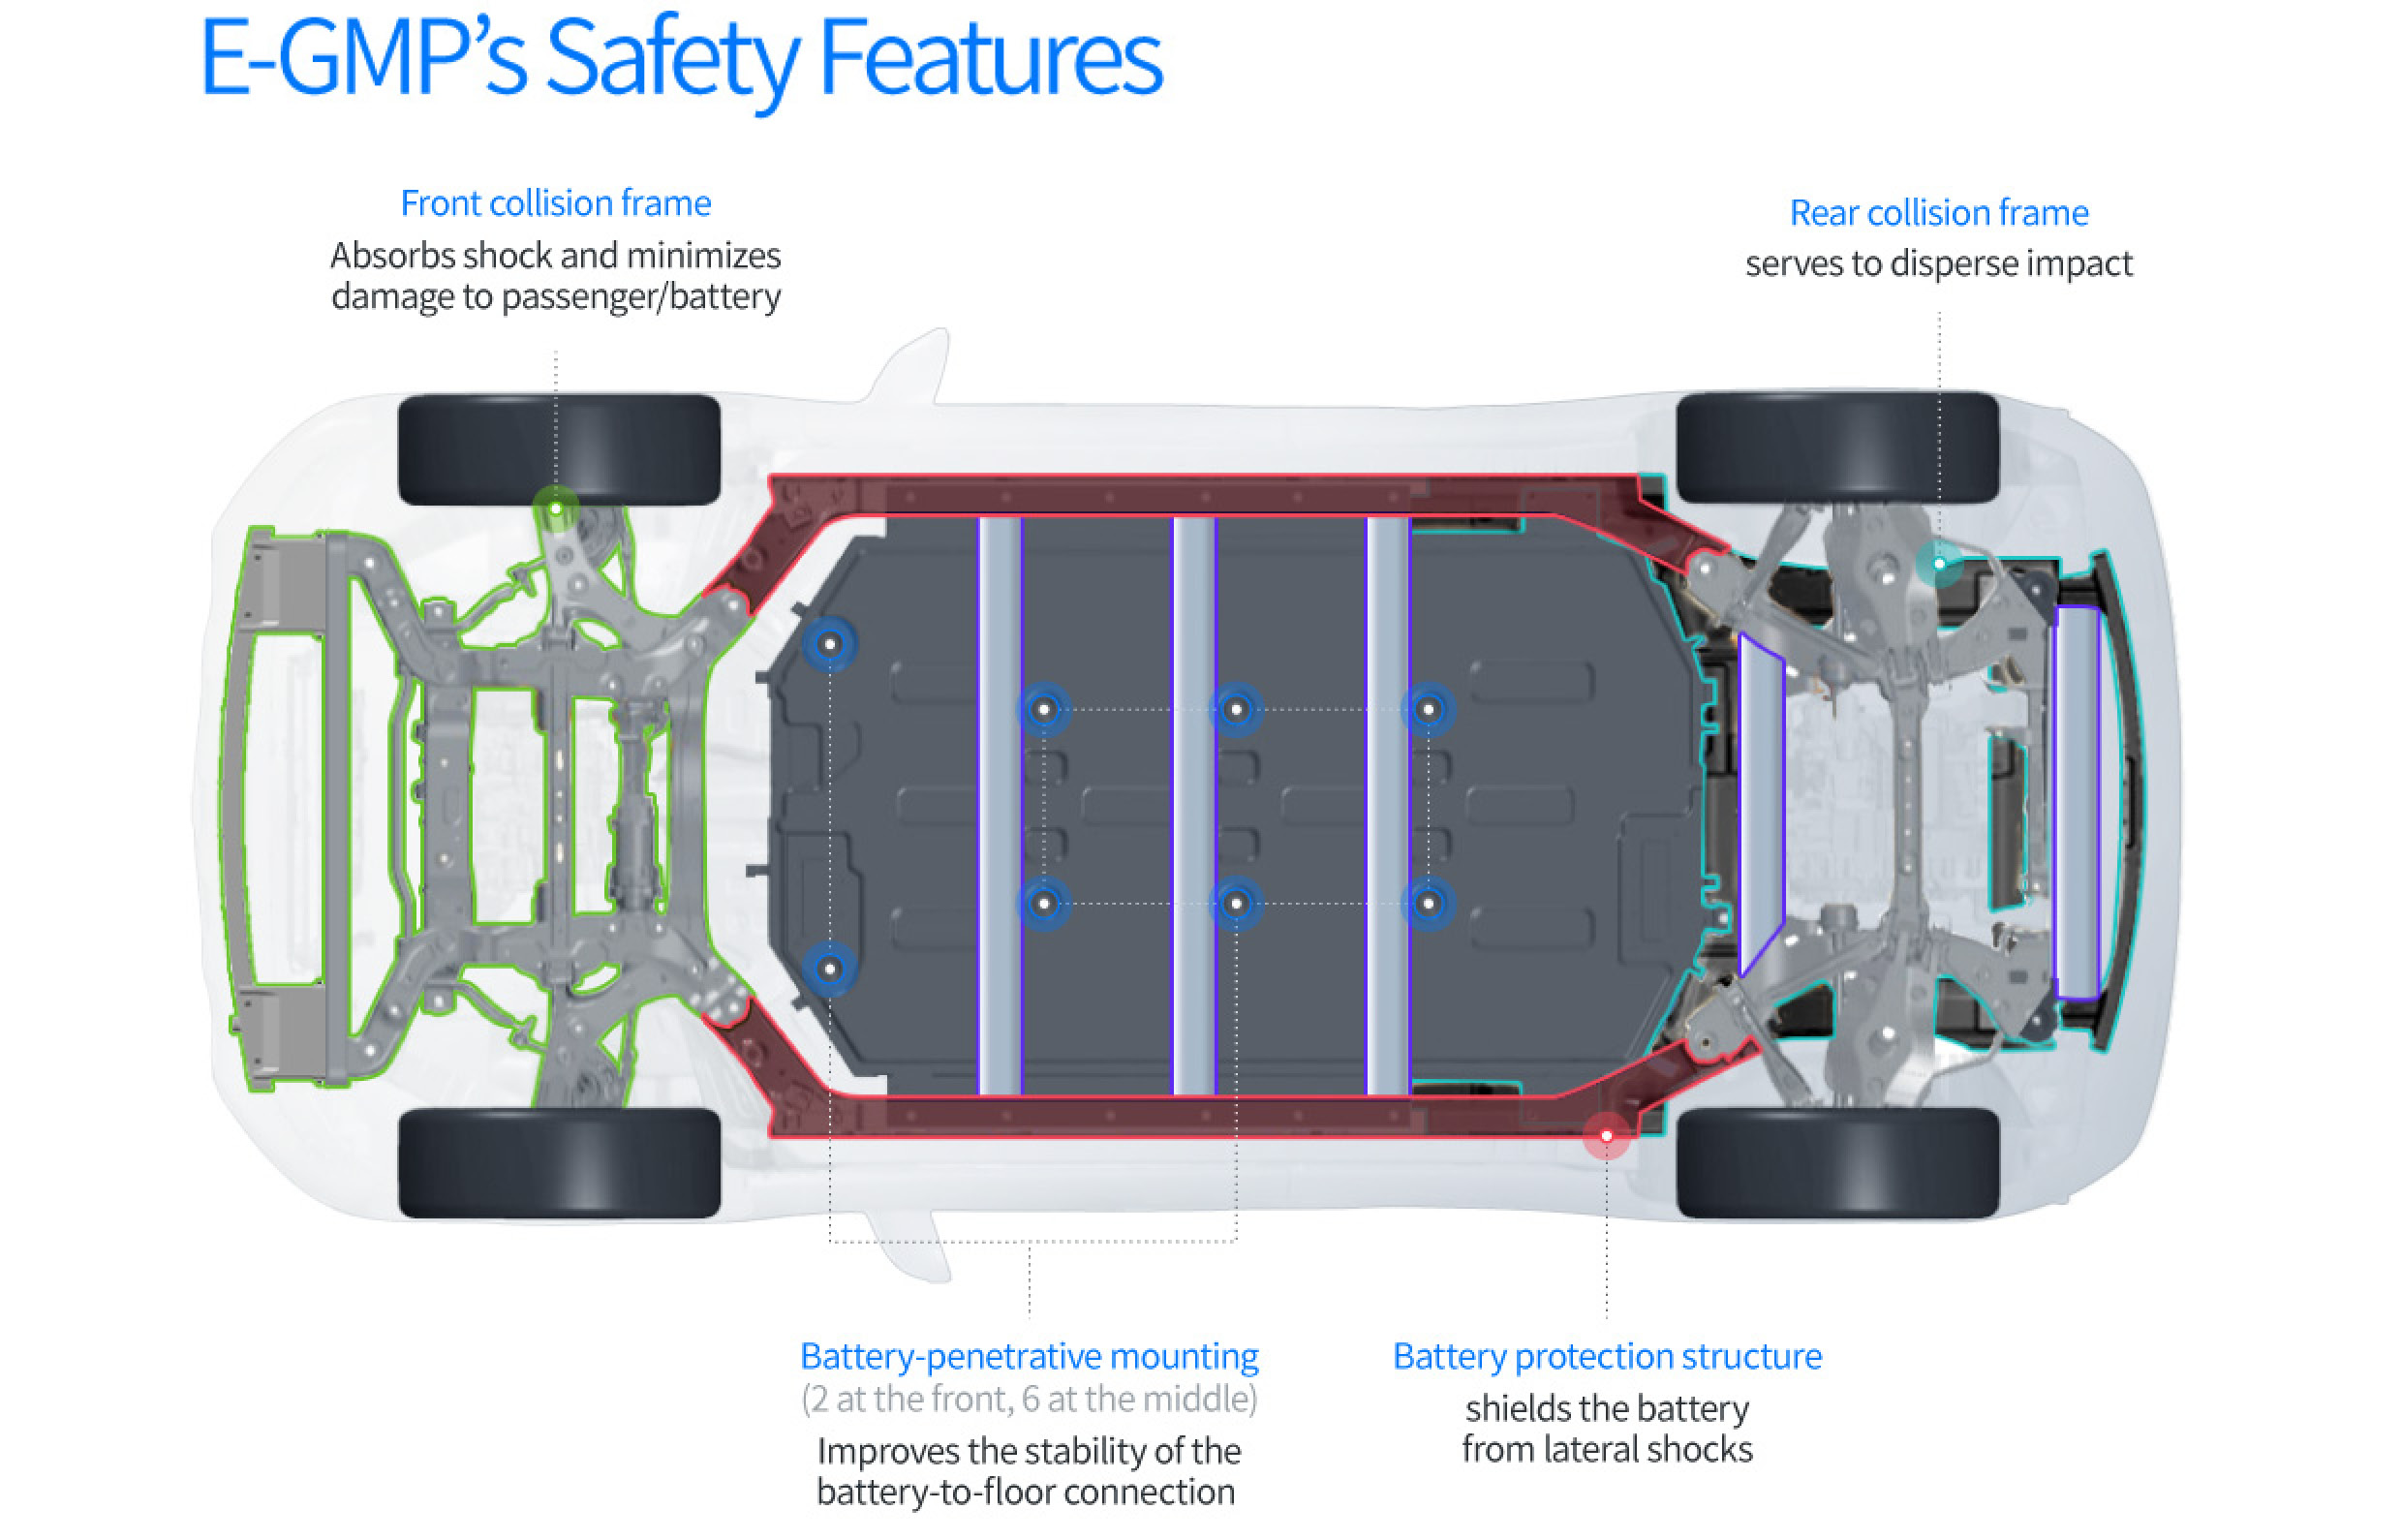 Safety Performance Components of E-GMP